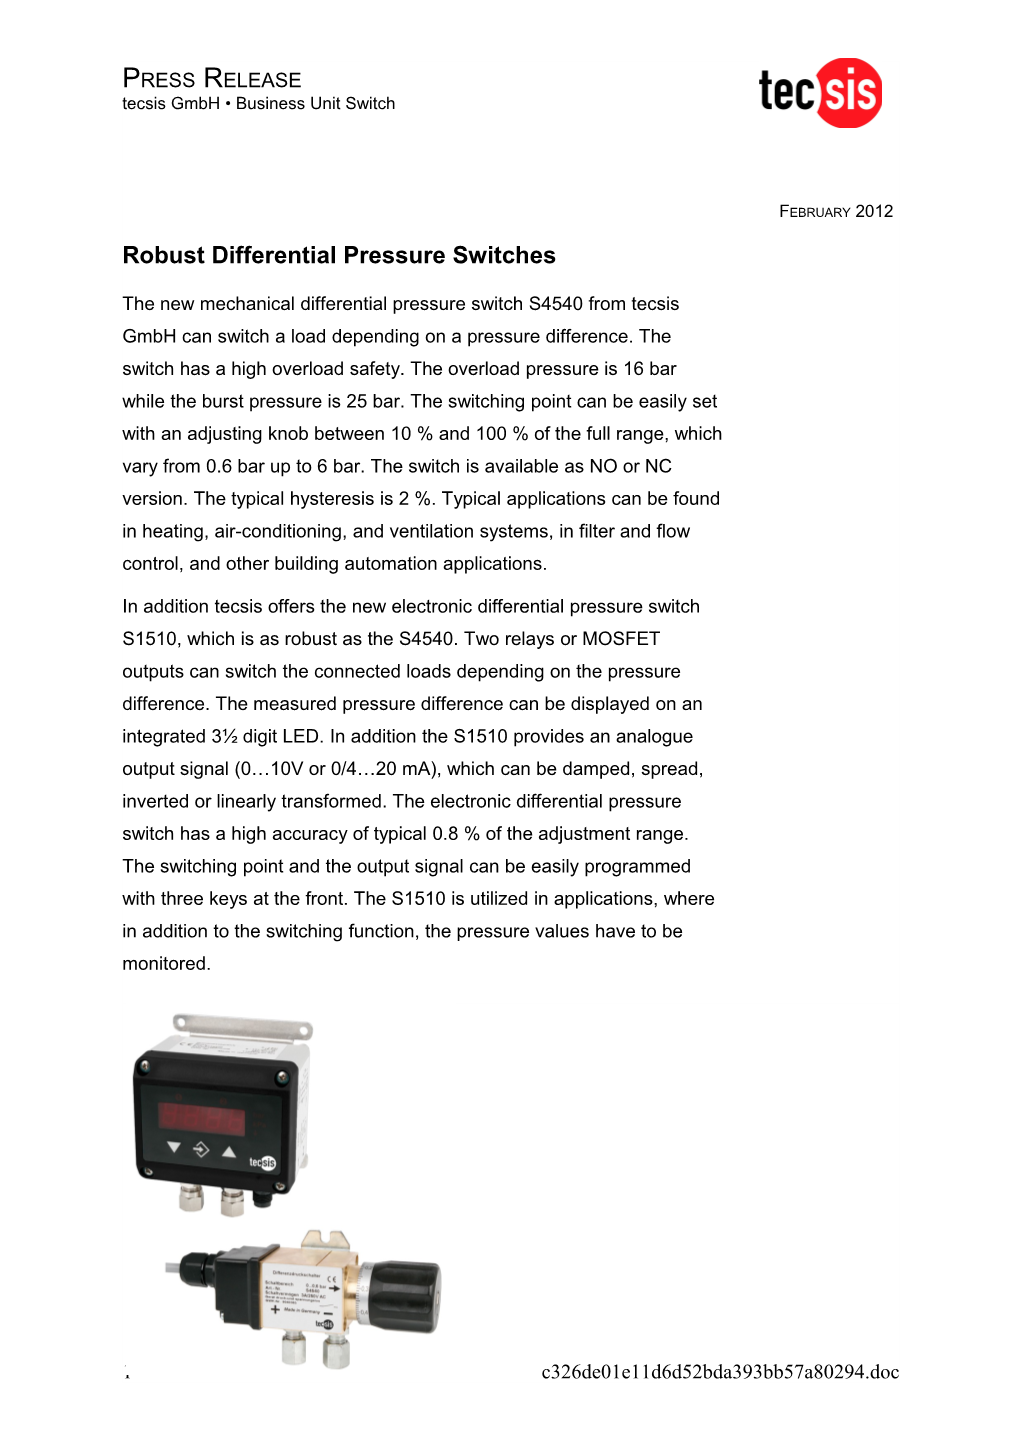 Robust Differential Pressure Switches